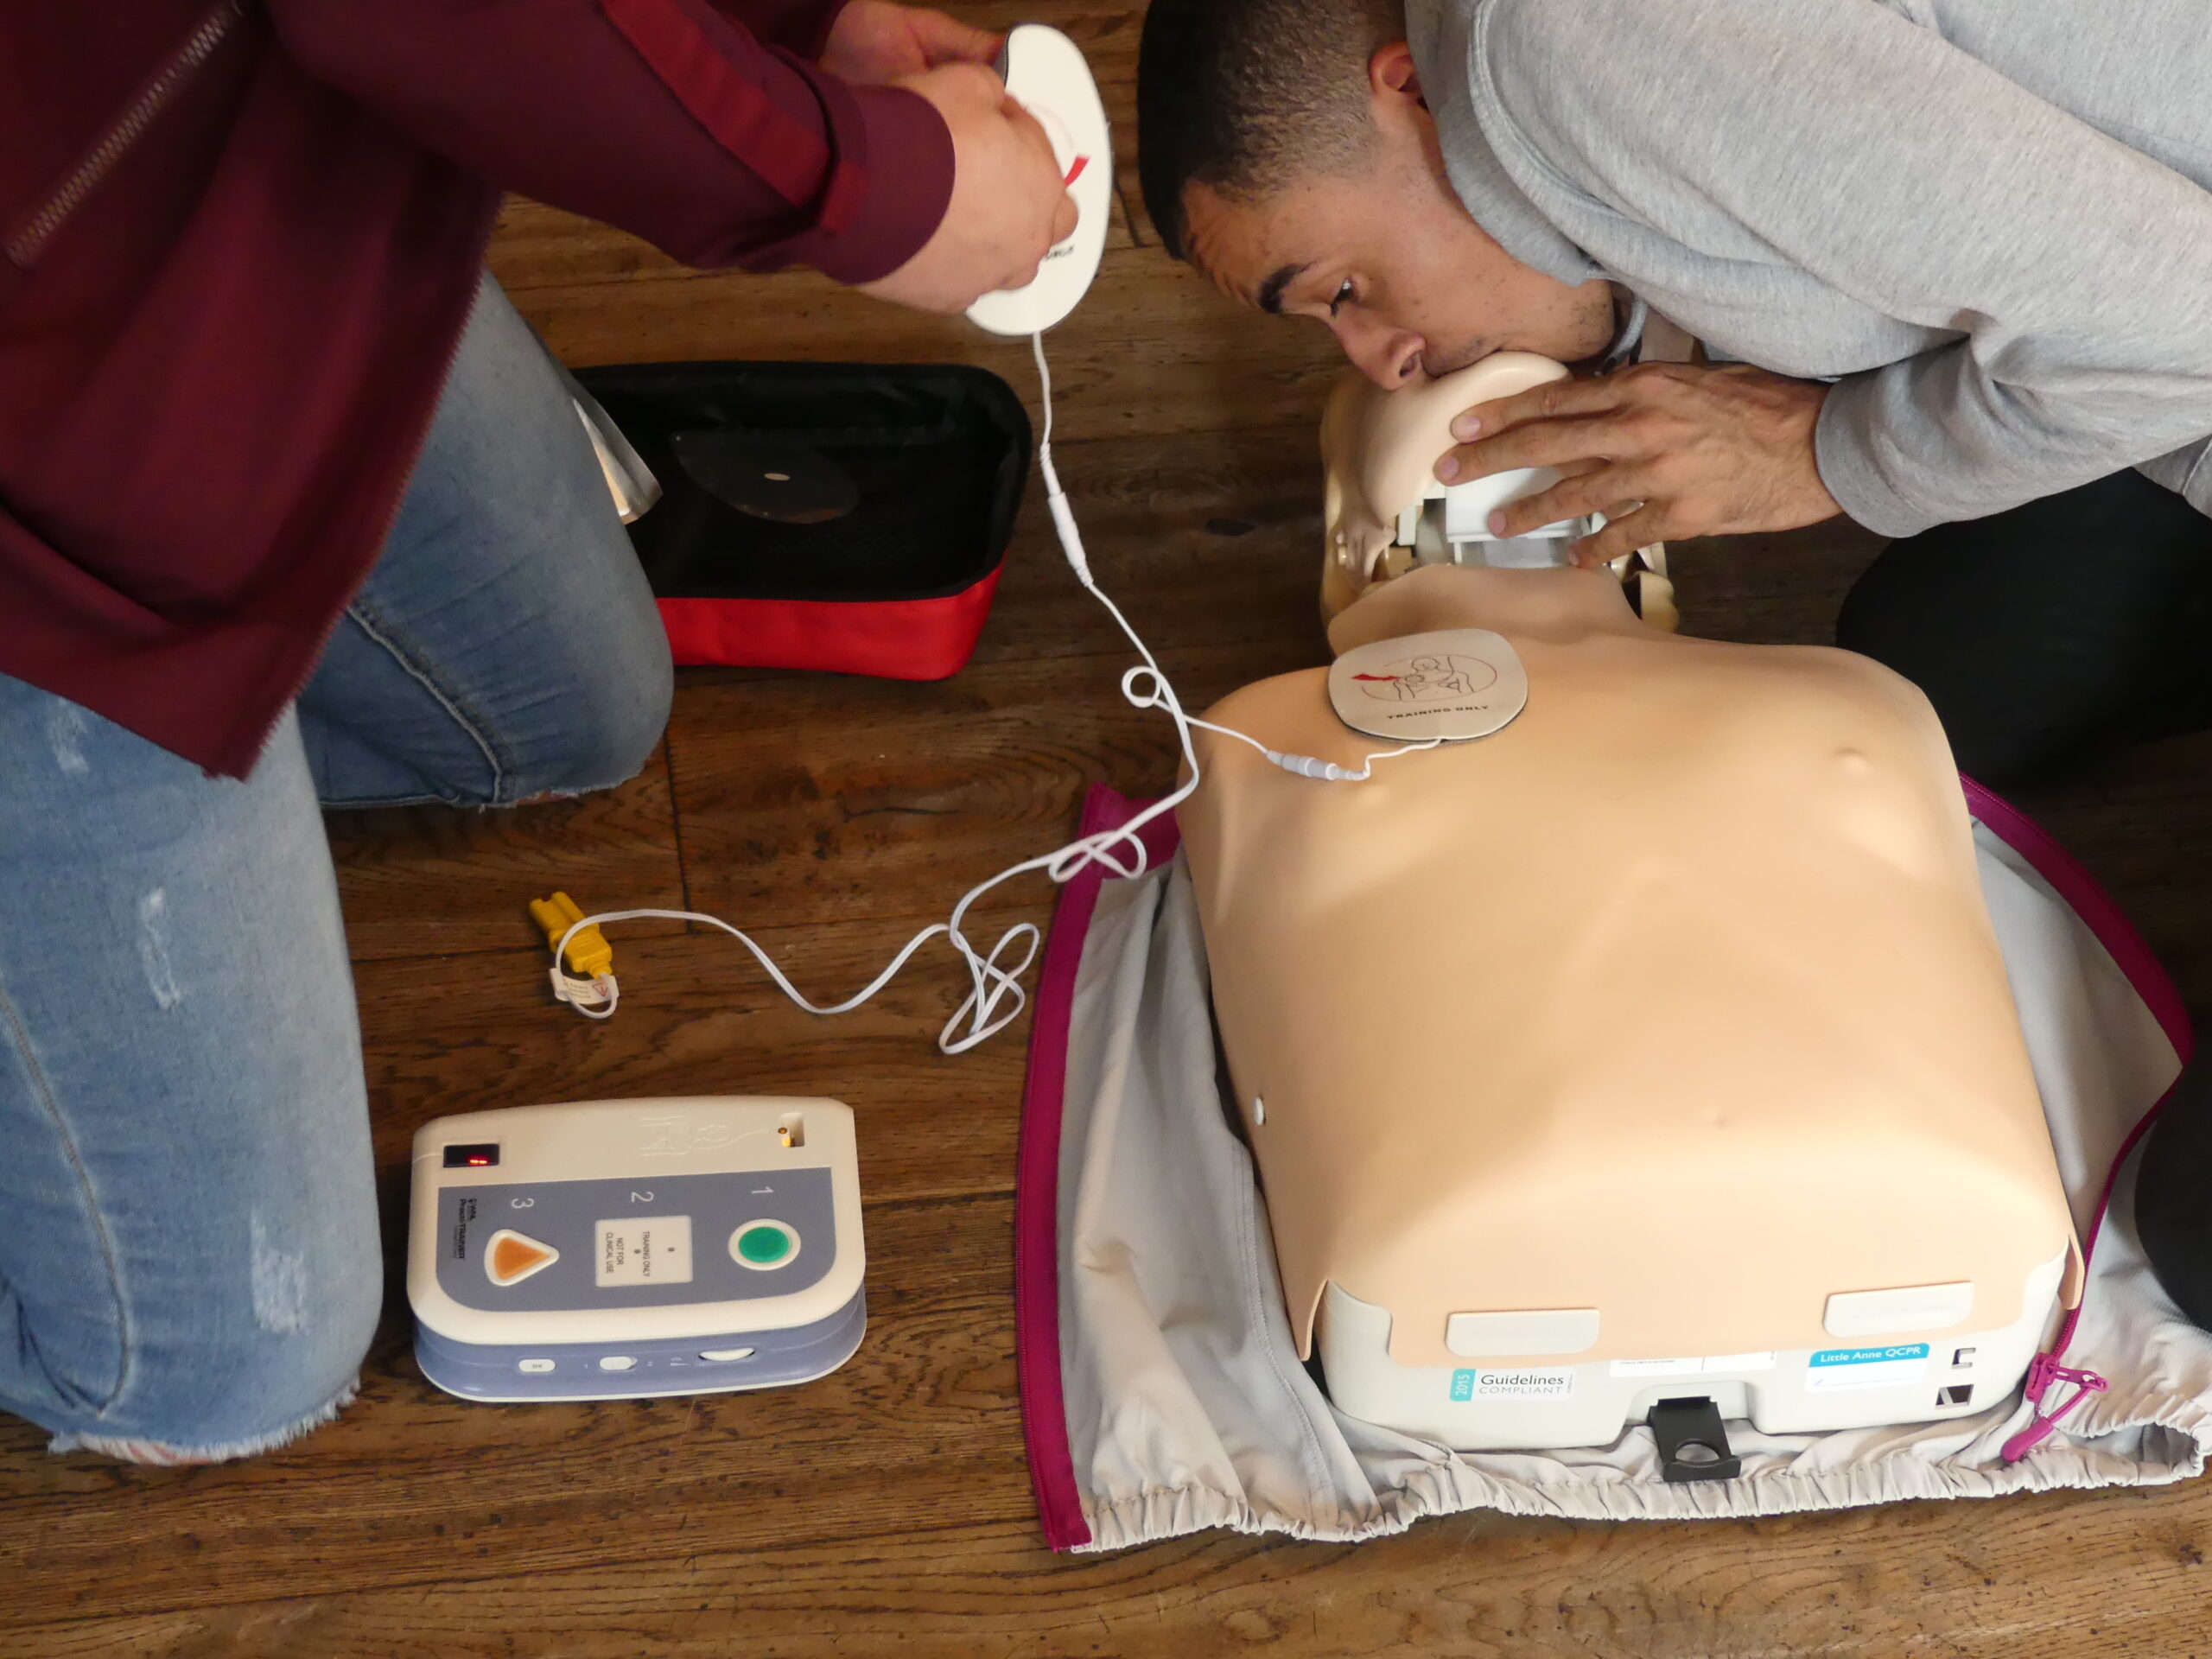 First aid training course with students practicing CPR and using a Defibrillator